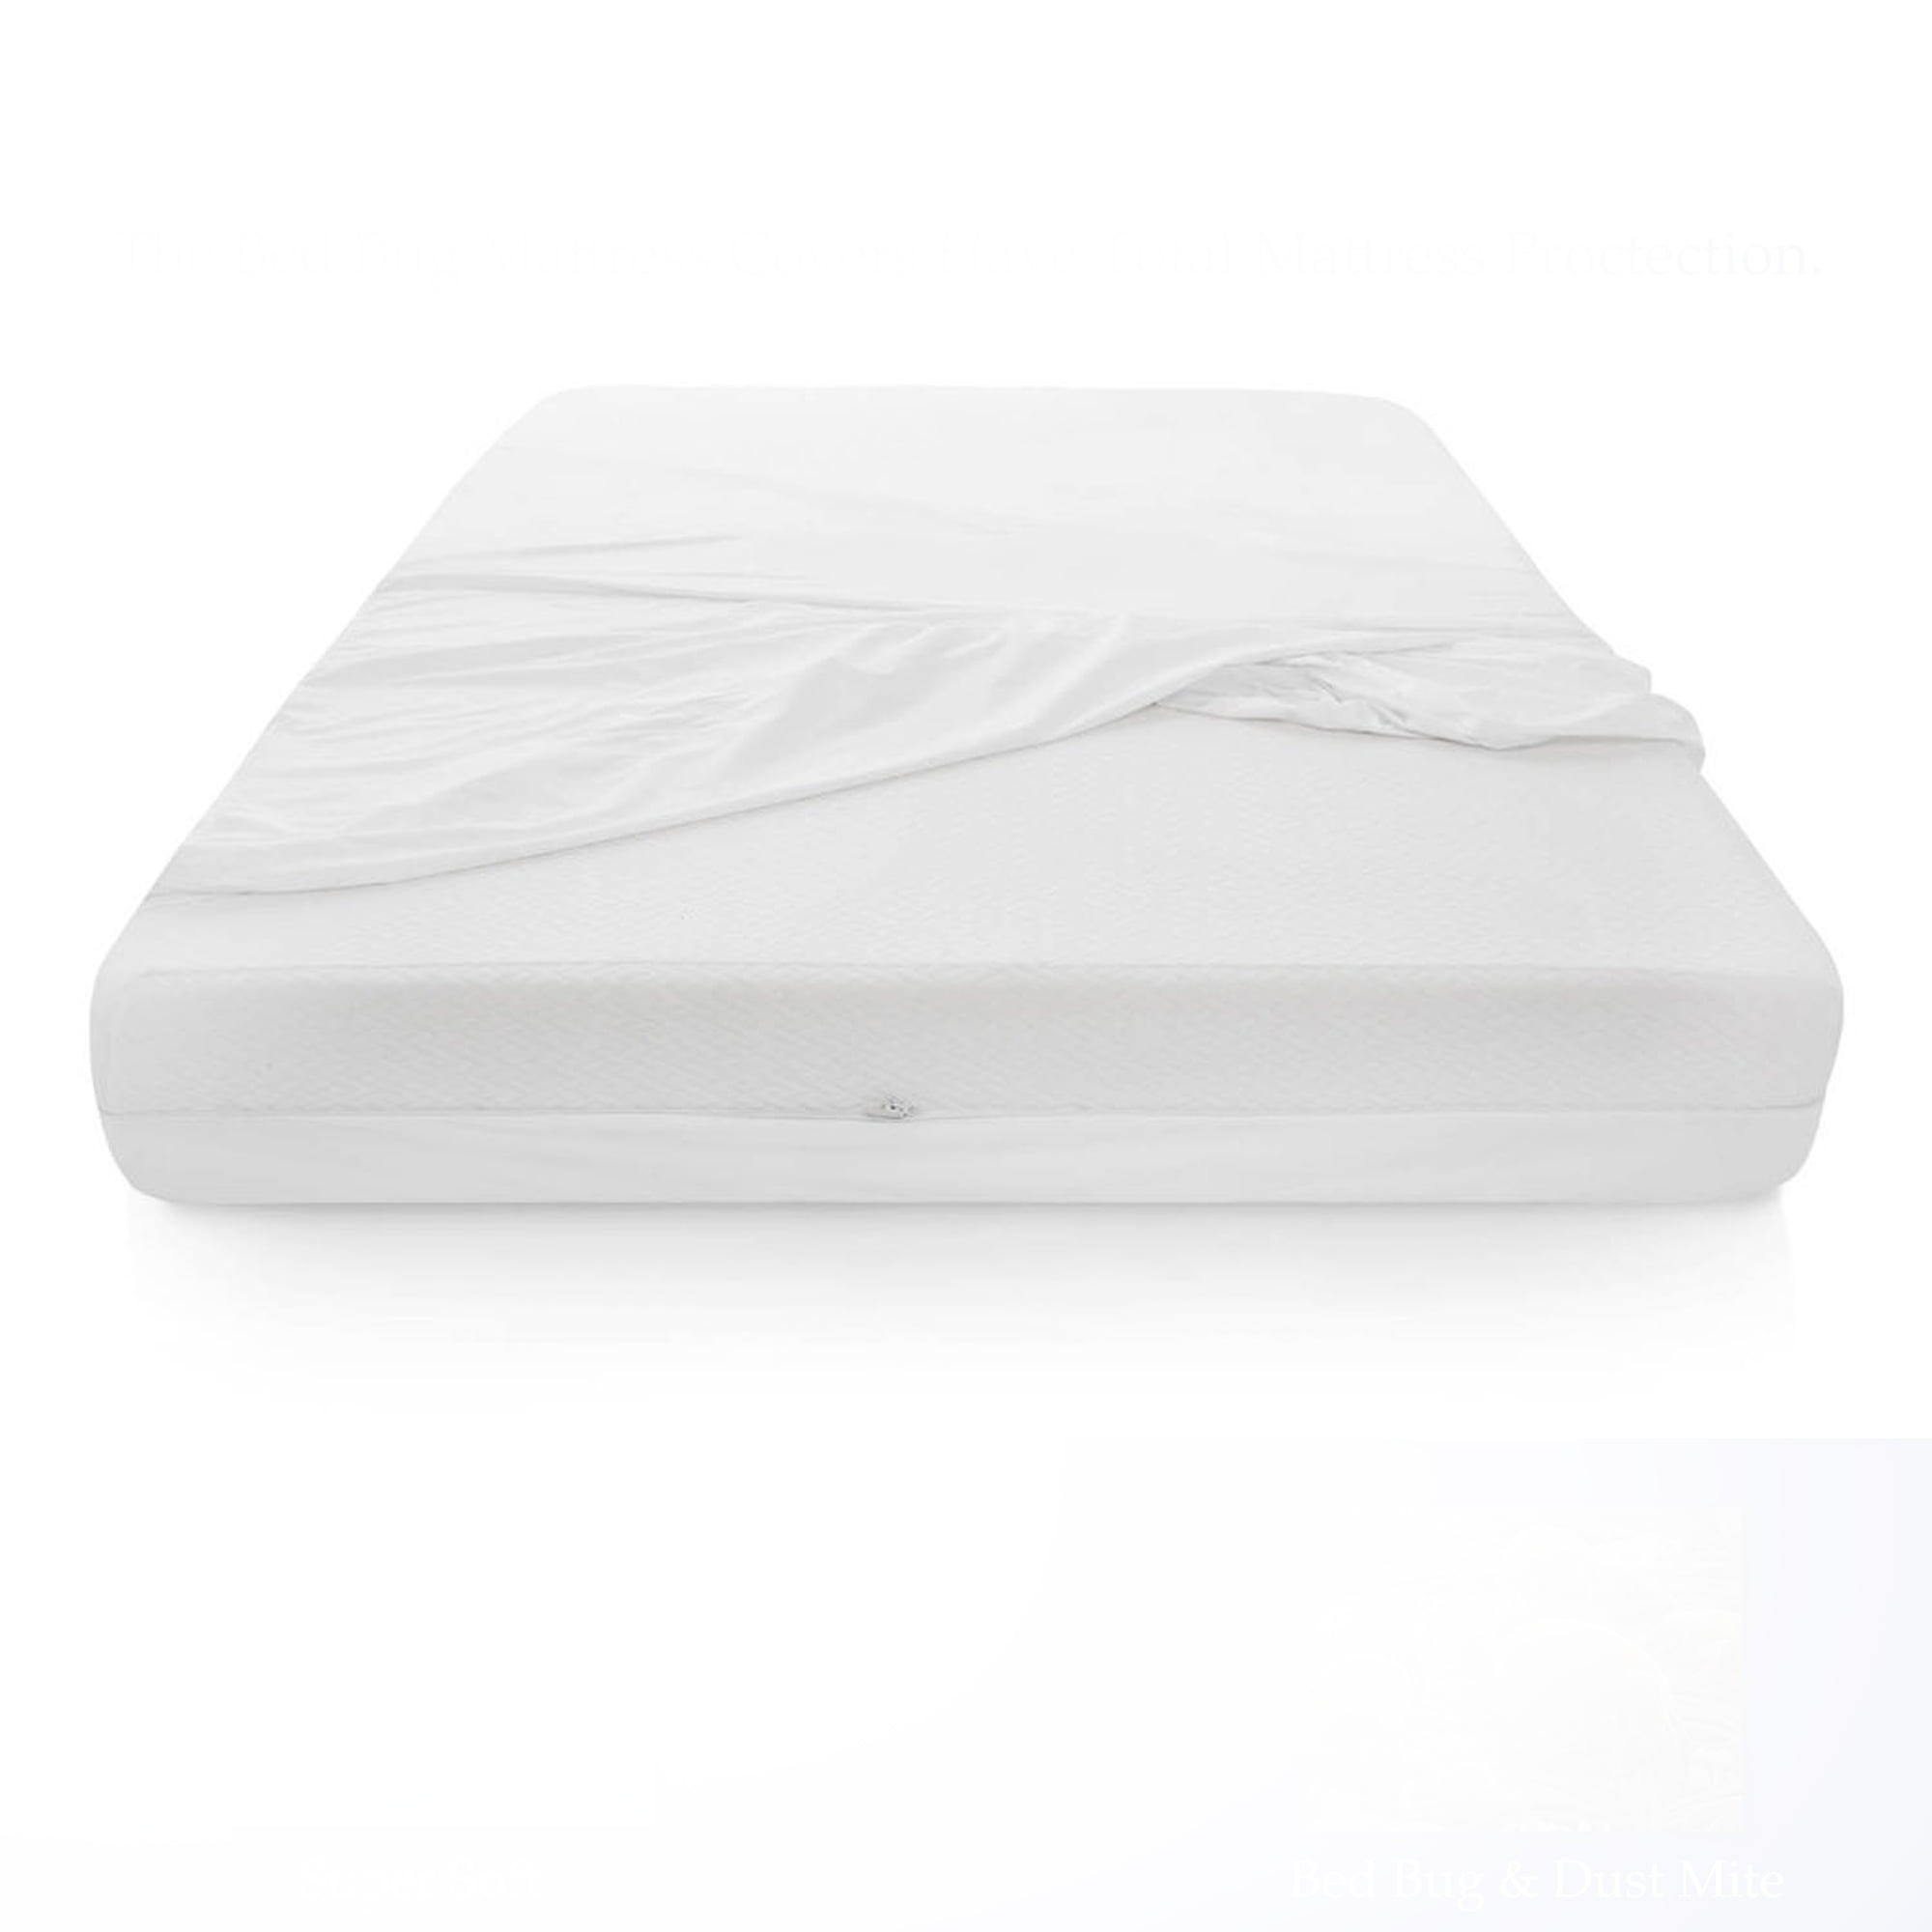 Details about   Waterproof Mattress Cover Zipper Queen Full Quilted Dust Fitted Sheet Protector 